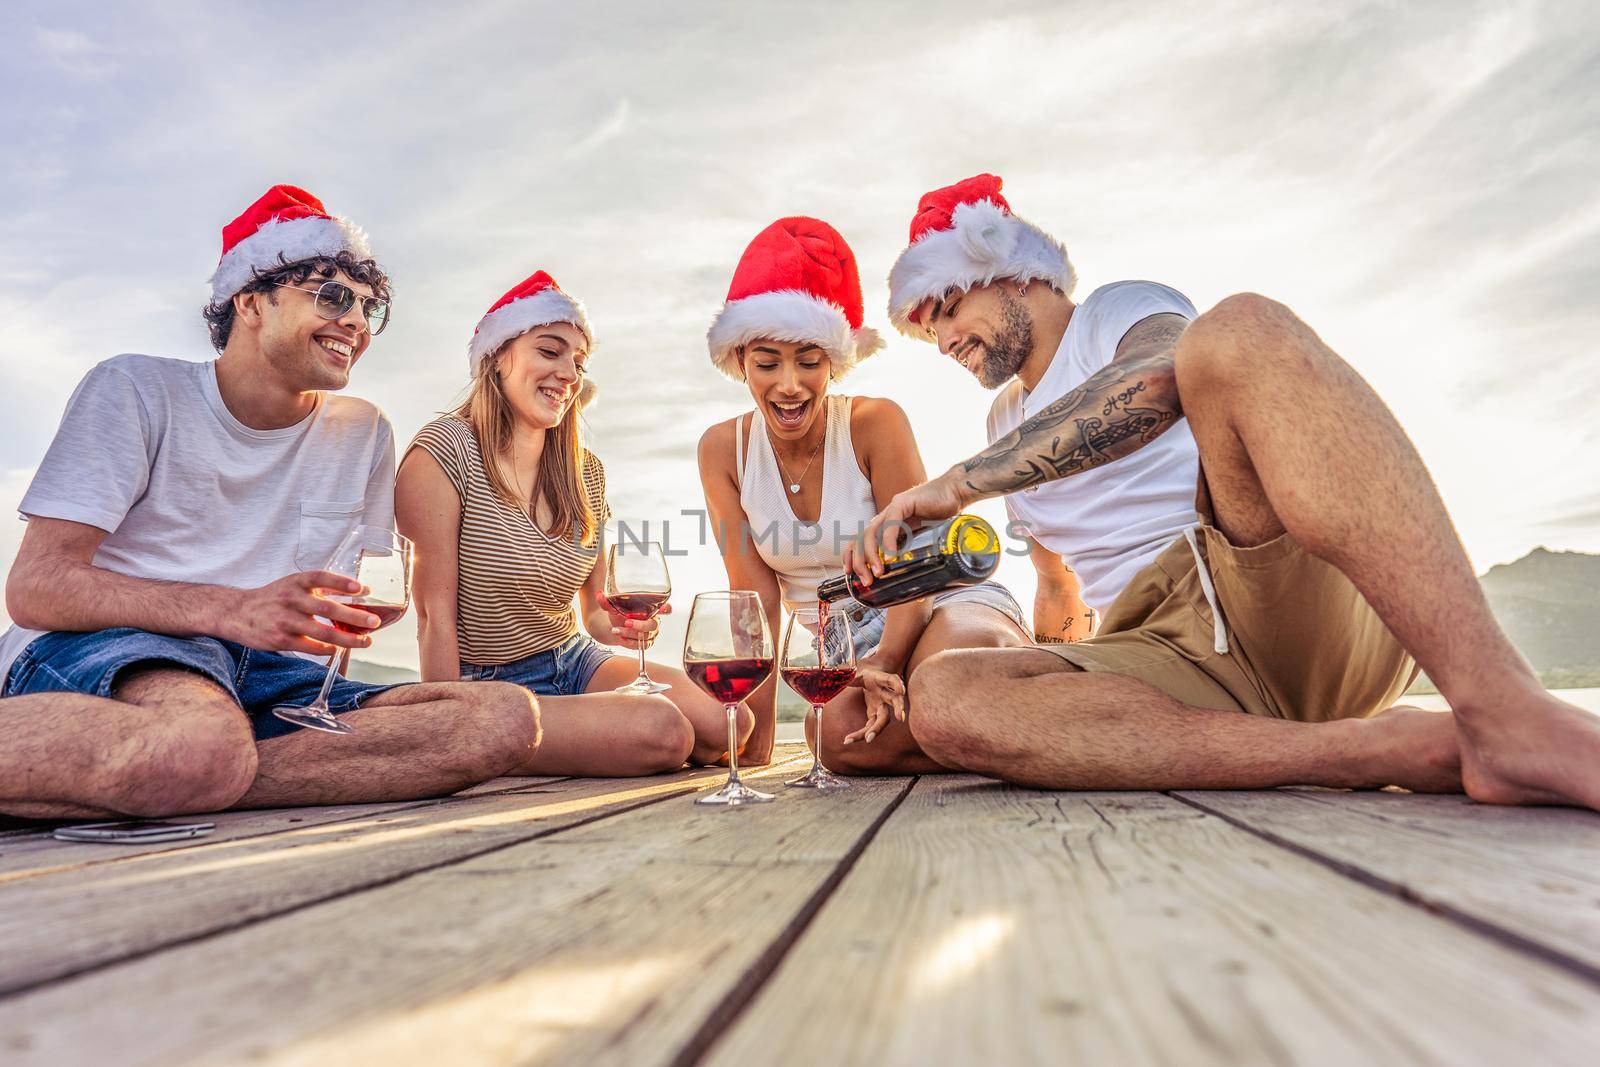 Happy people enjoying outdoor life in exotic vacation resort drinking alcohol. Group of young friends having fun together at sunset wearing red Santa Claus hat sitting on a pier in sea vacation resort